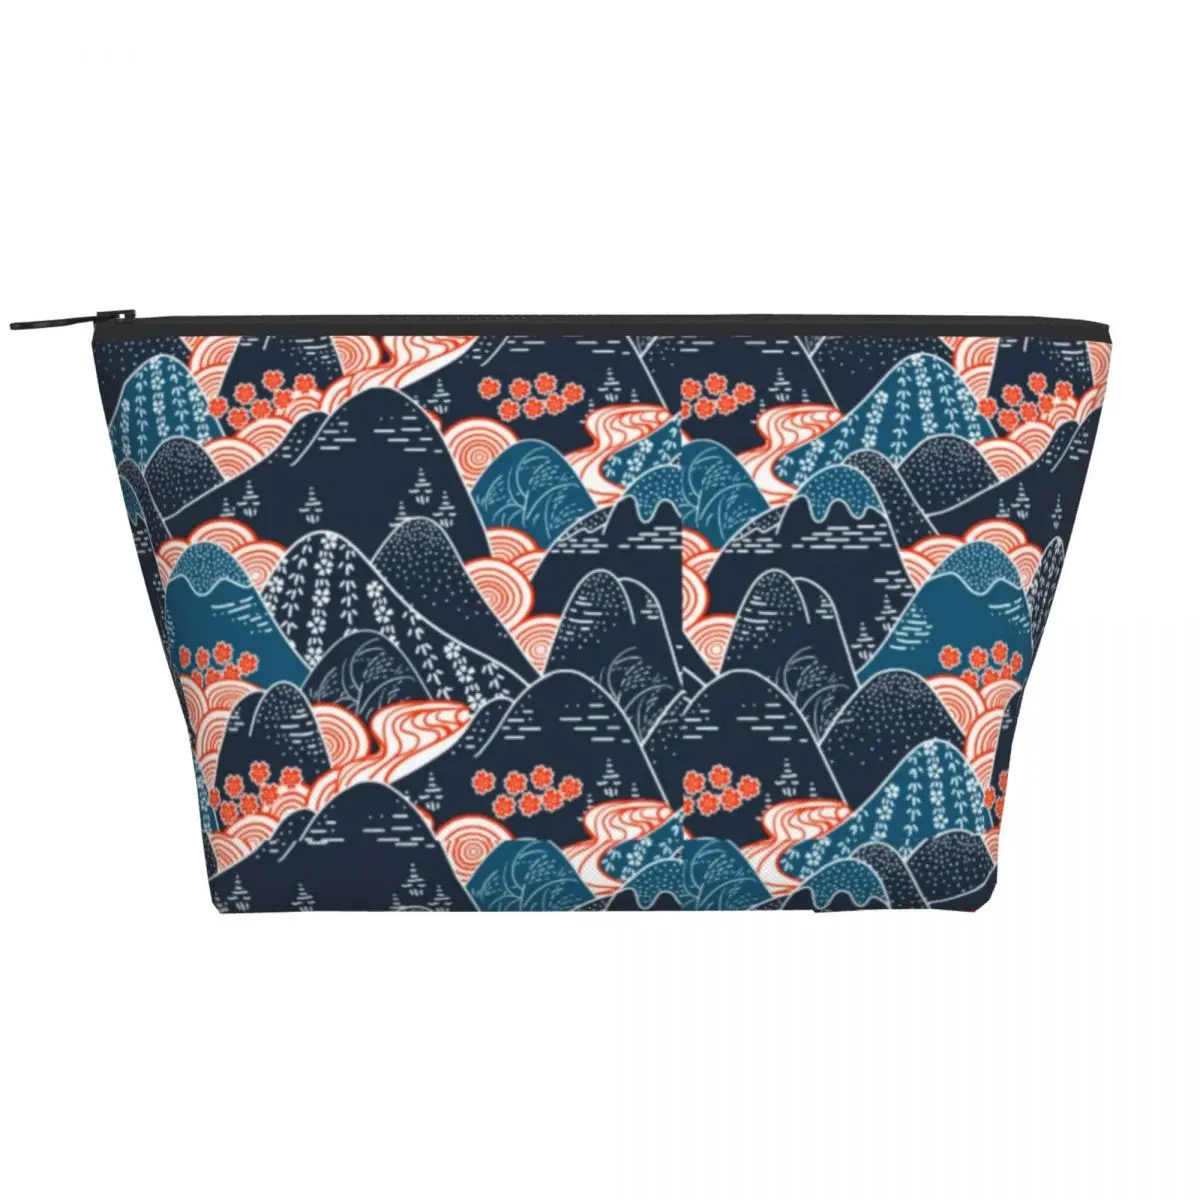 

Mountains Kimono Art Zipper Storage Organizers Japan Traditional Landscape For Girls Makeup Pouch Pack For Makeups Cosmetic Bags